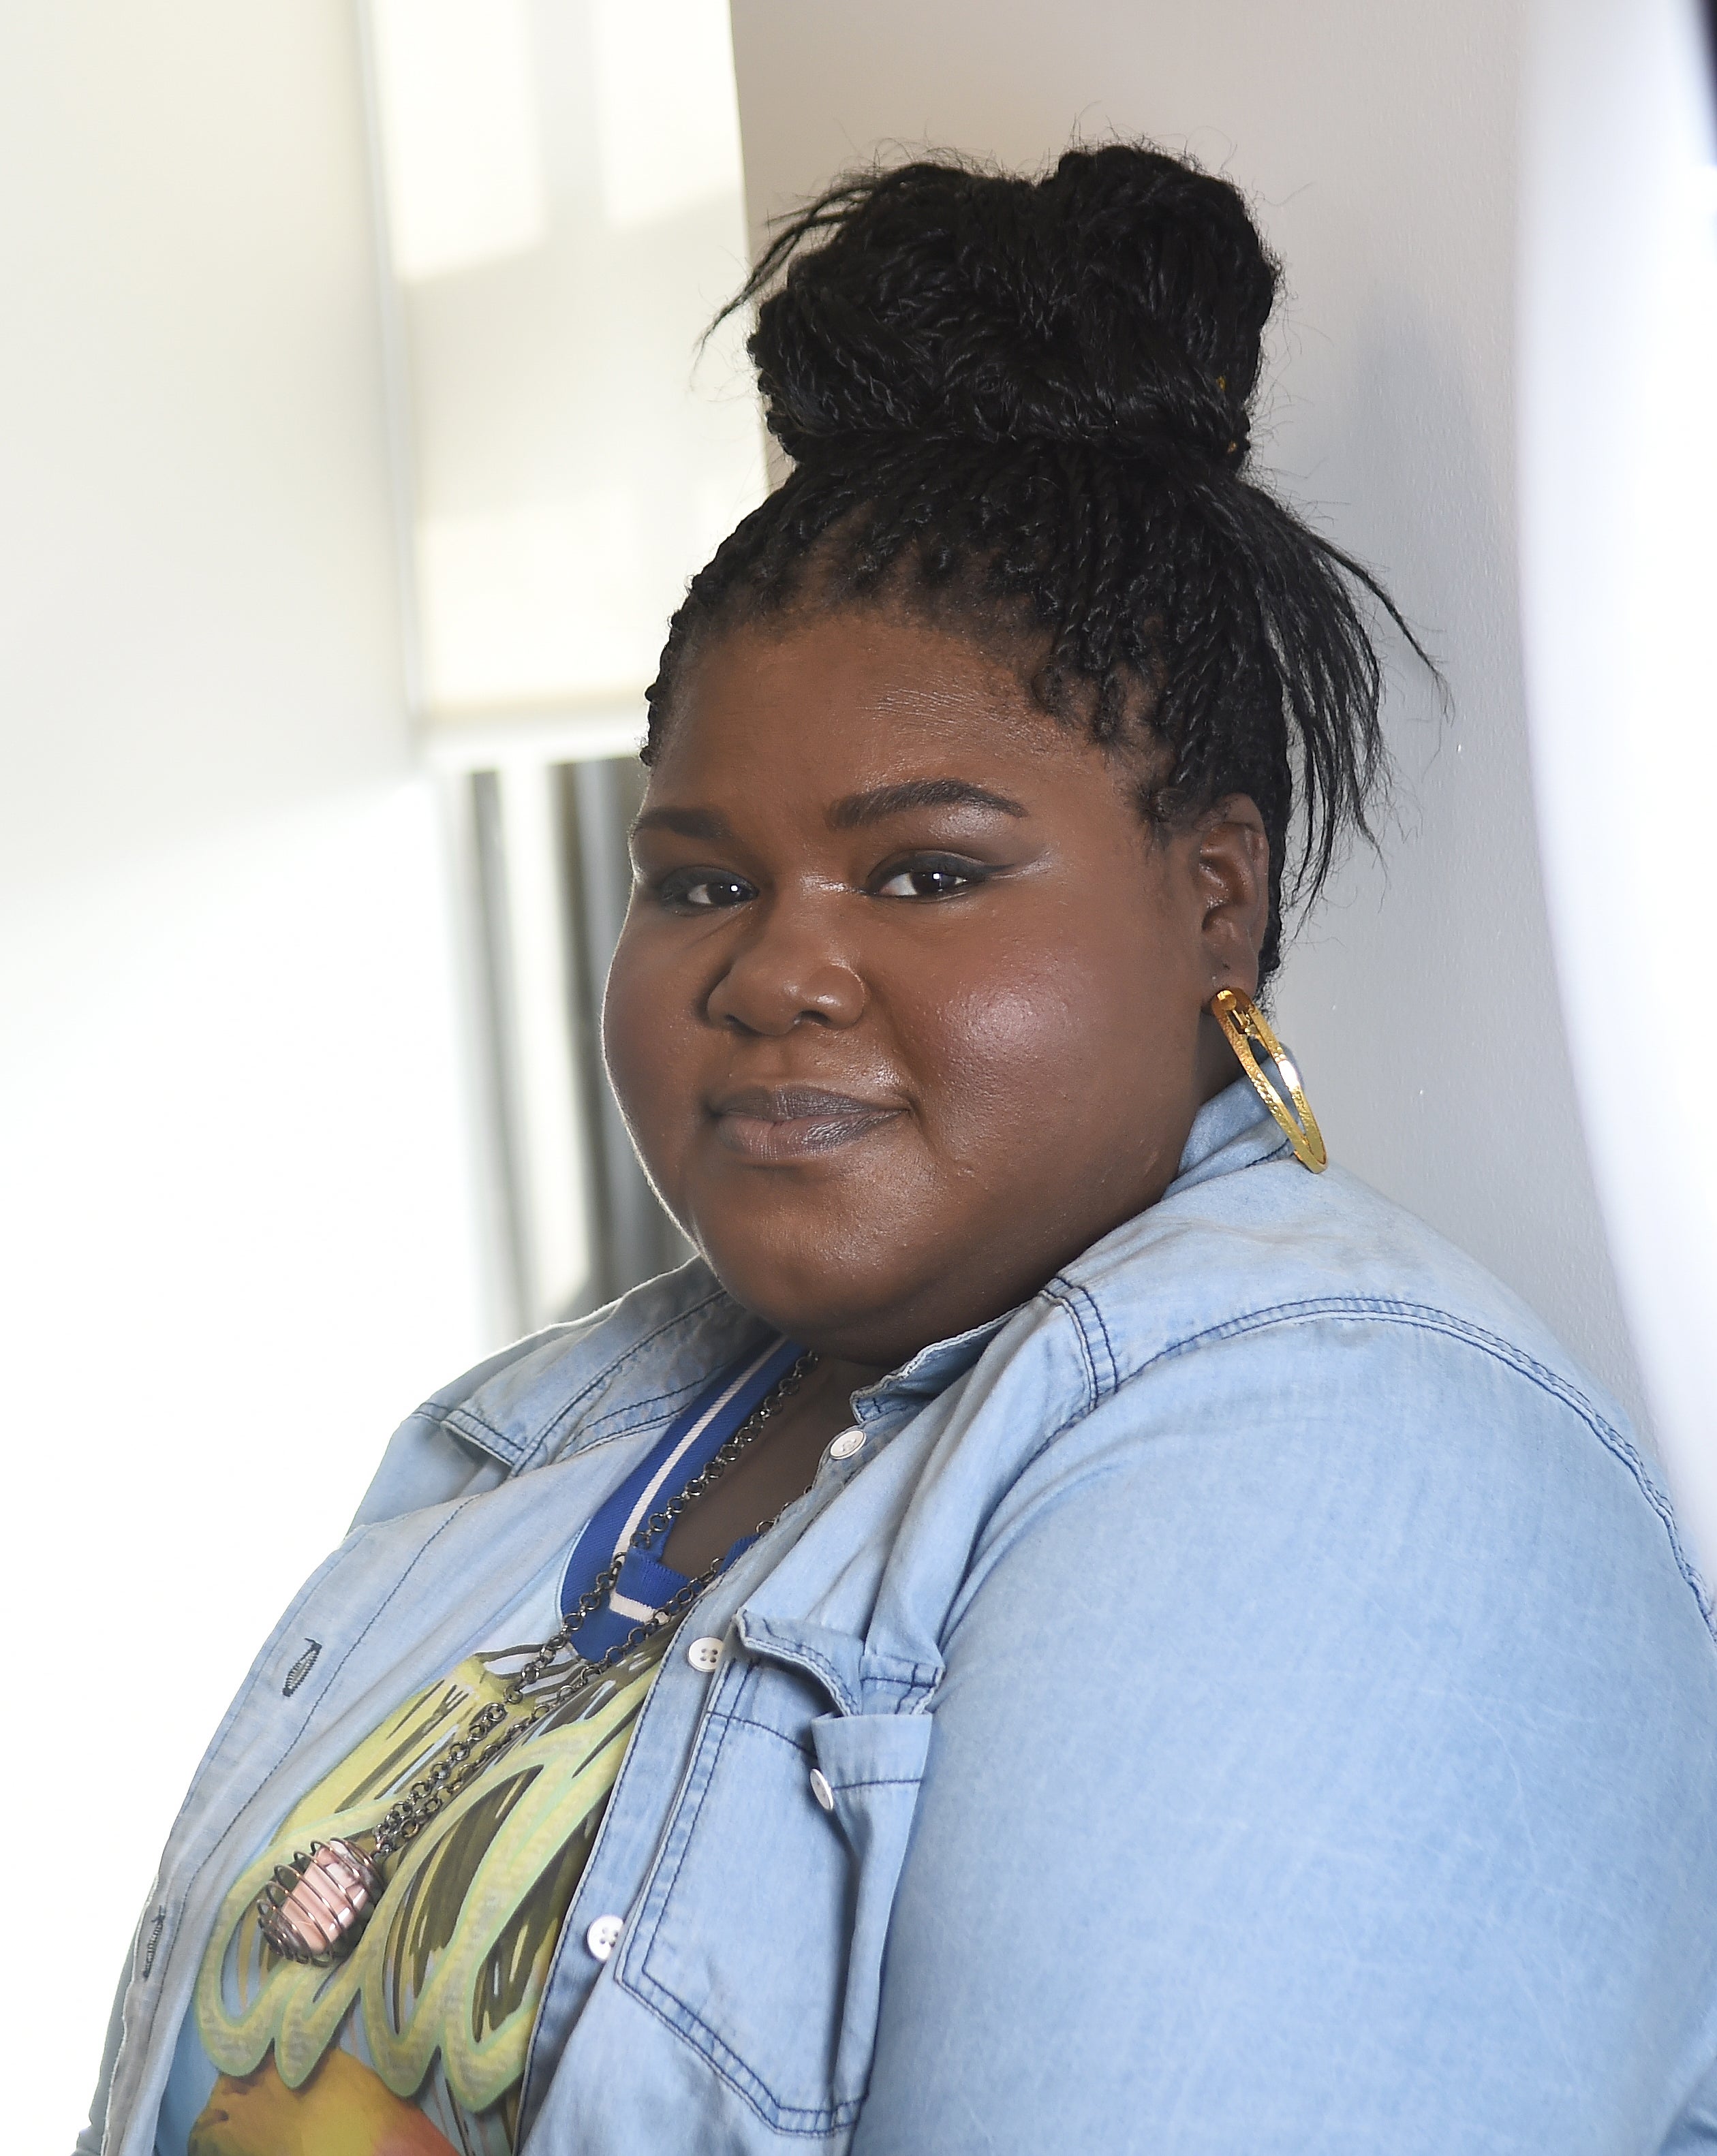 Gabourey Sidibe Reveals Battle With Bulimia And Suicidal Thoughts In New Memoir
